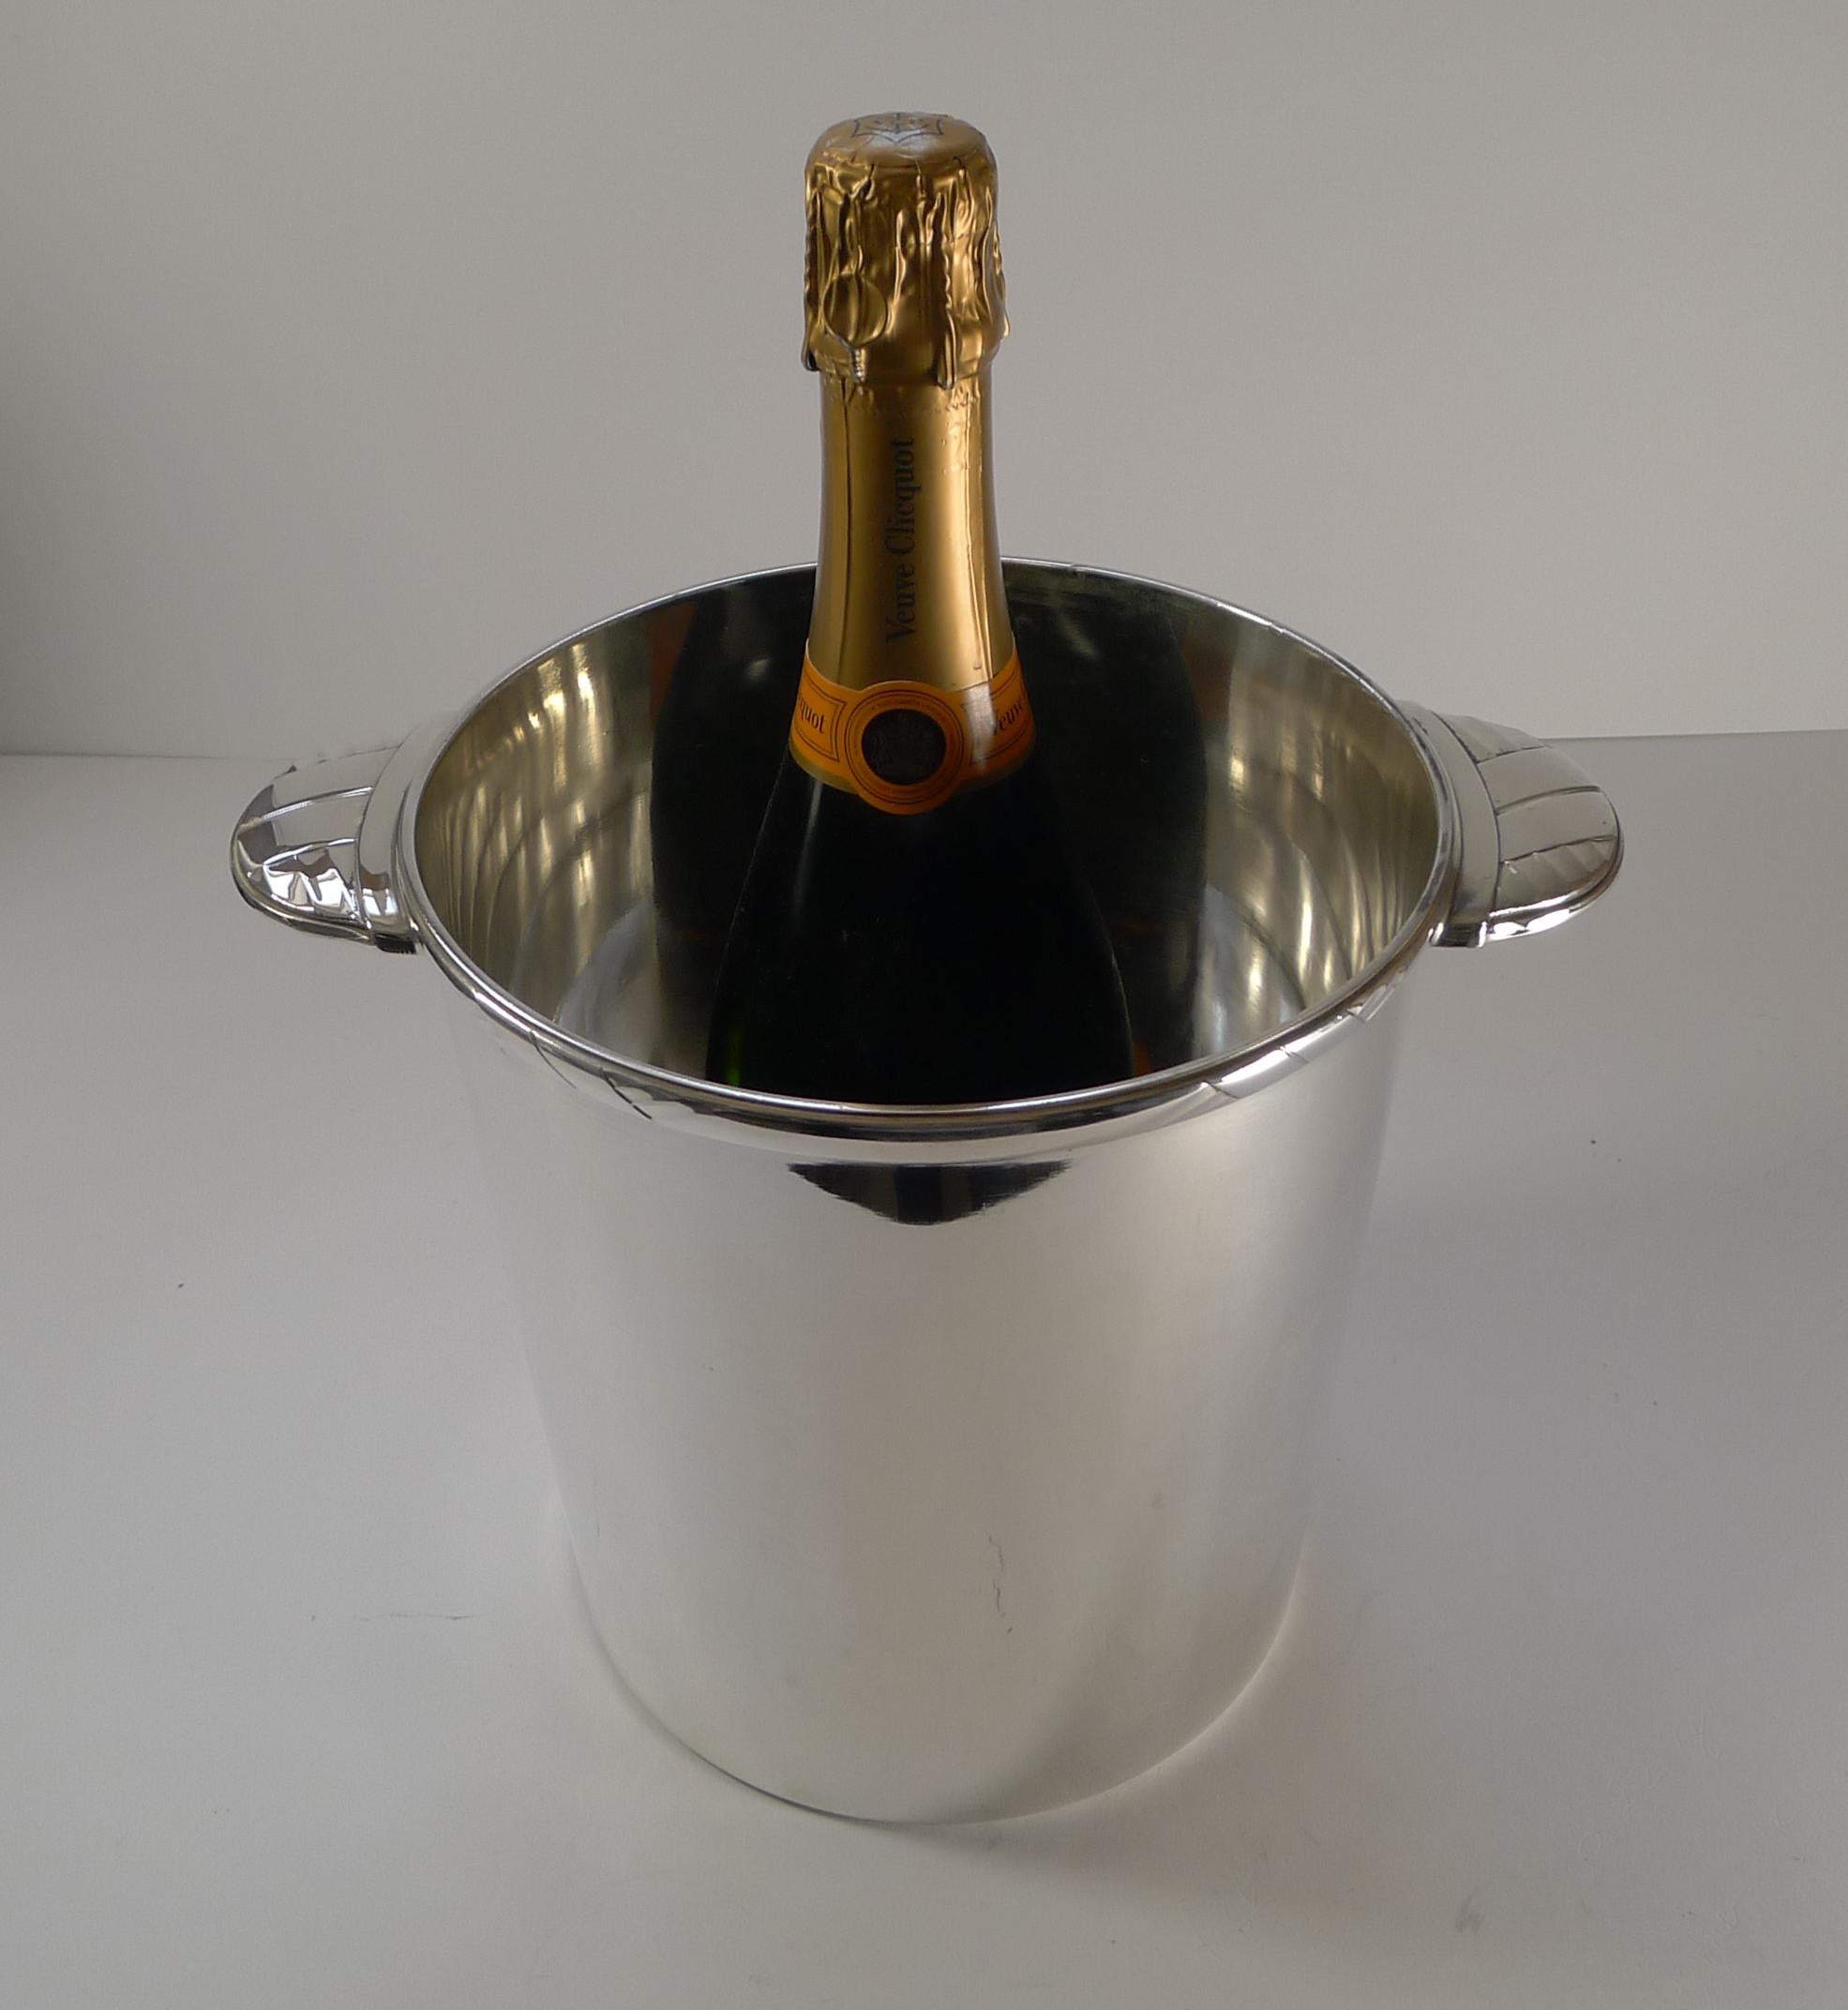 Rare French Art Deco Champagne Bucket / Wine Cooler by Ercuis, Paris 4